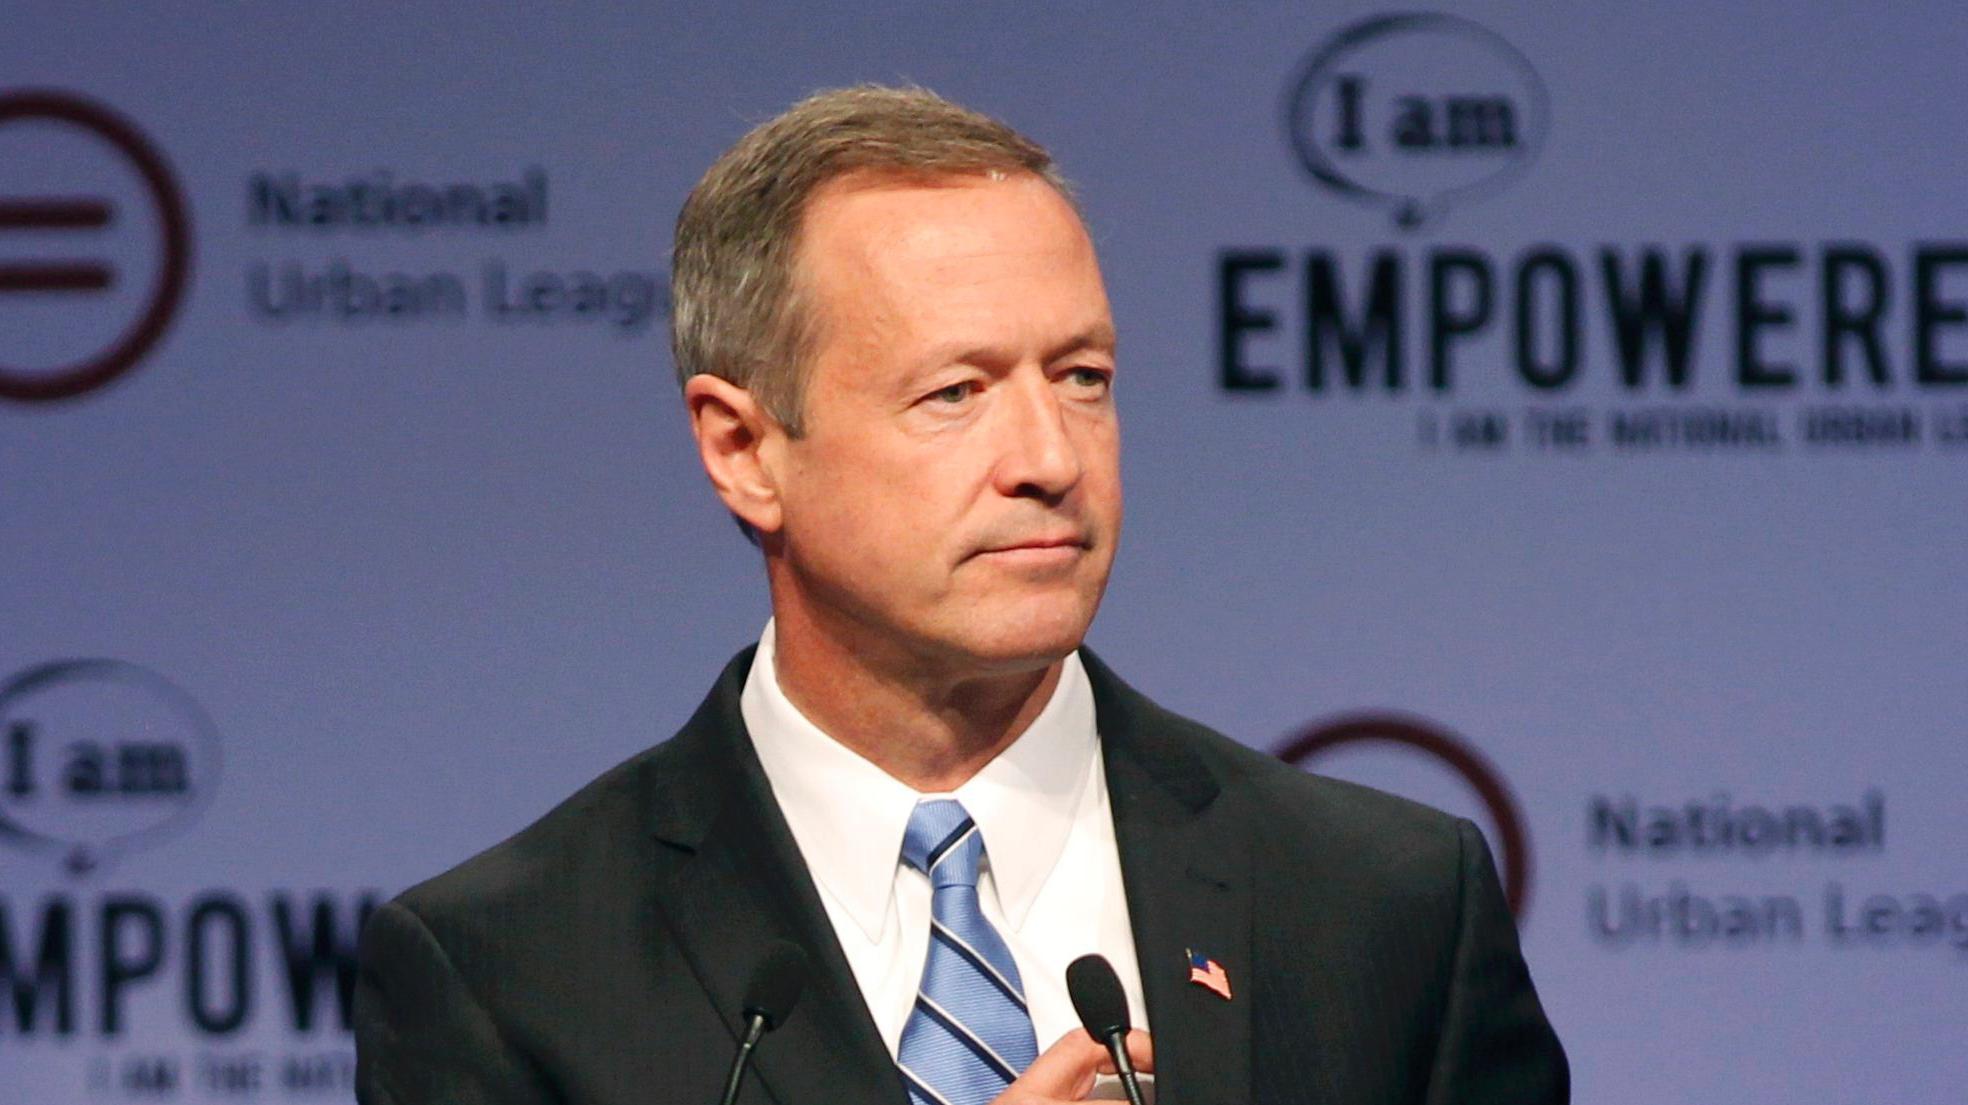 U.S. Democratic presidential candidate and former Maryland governor Martin O'Malley speaks at the National Urban League's conference in Fort Lauderdale, Florida July 31,2015.